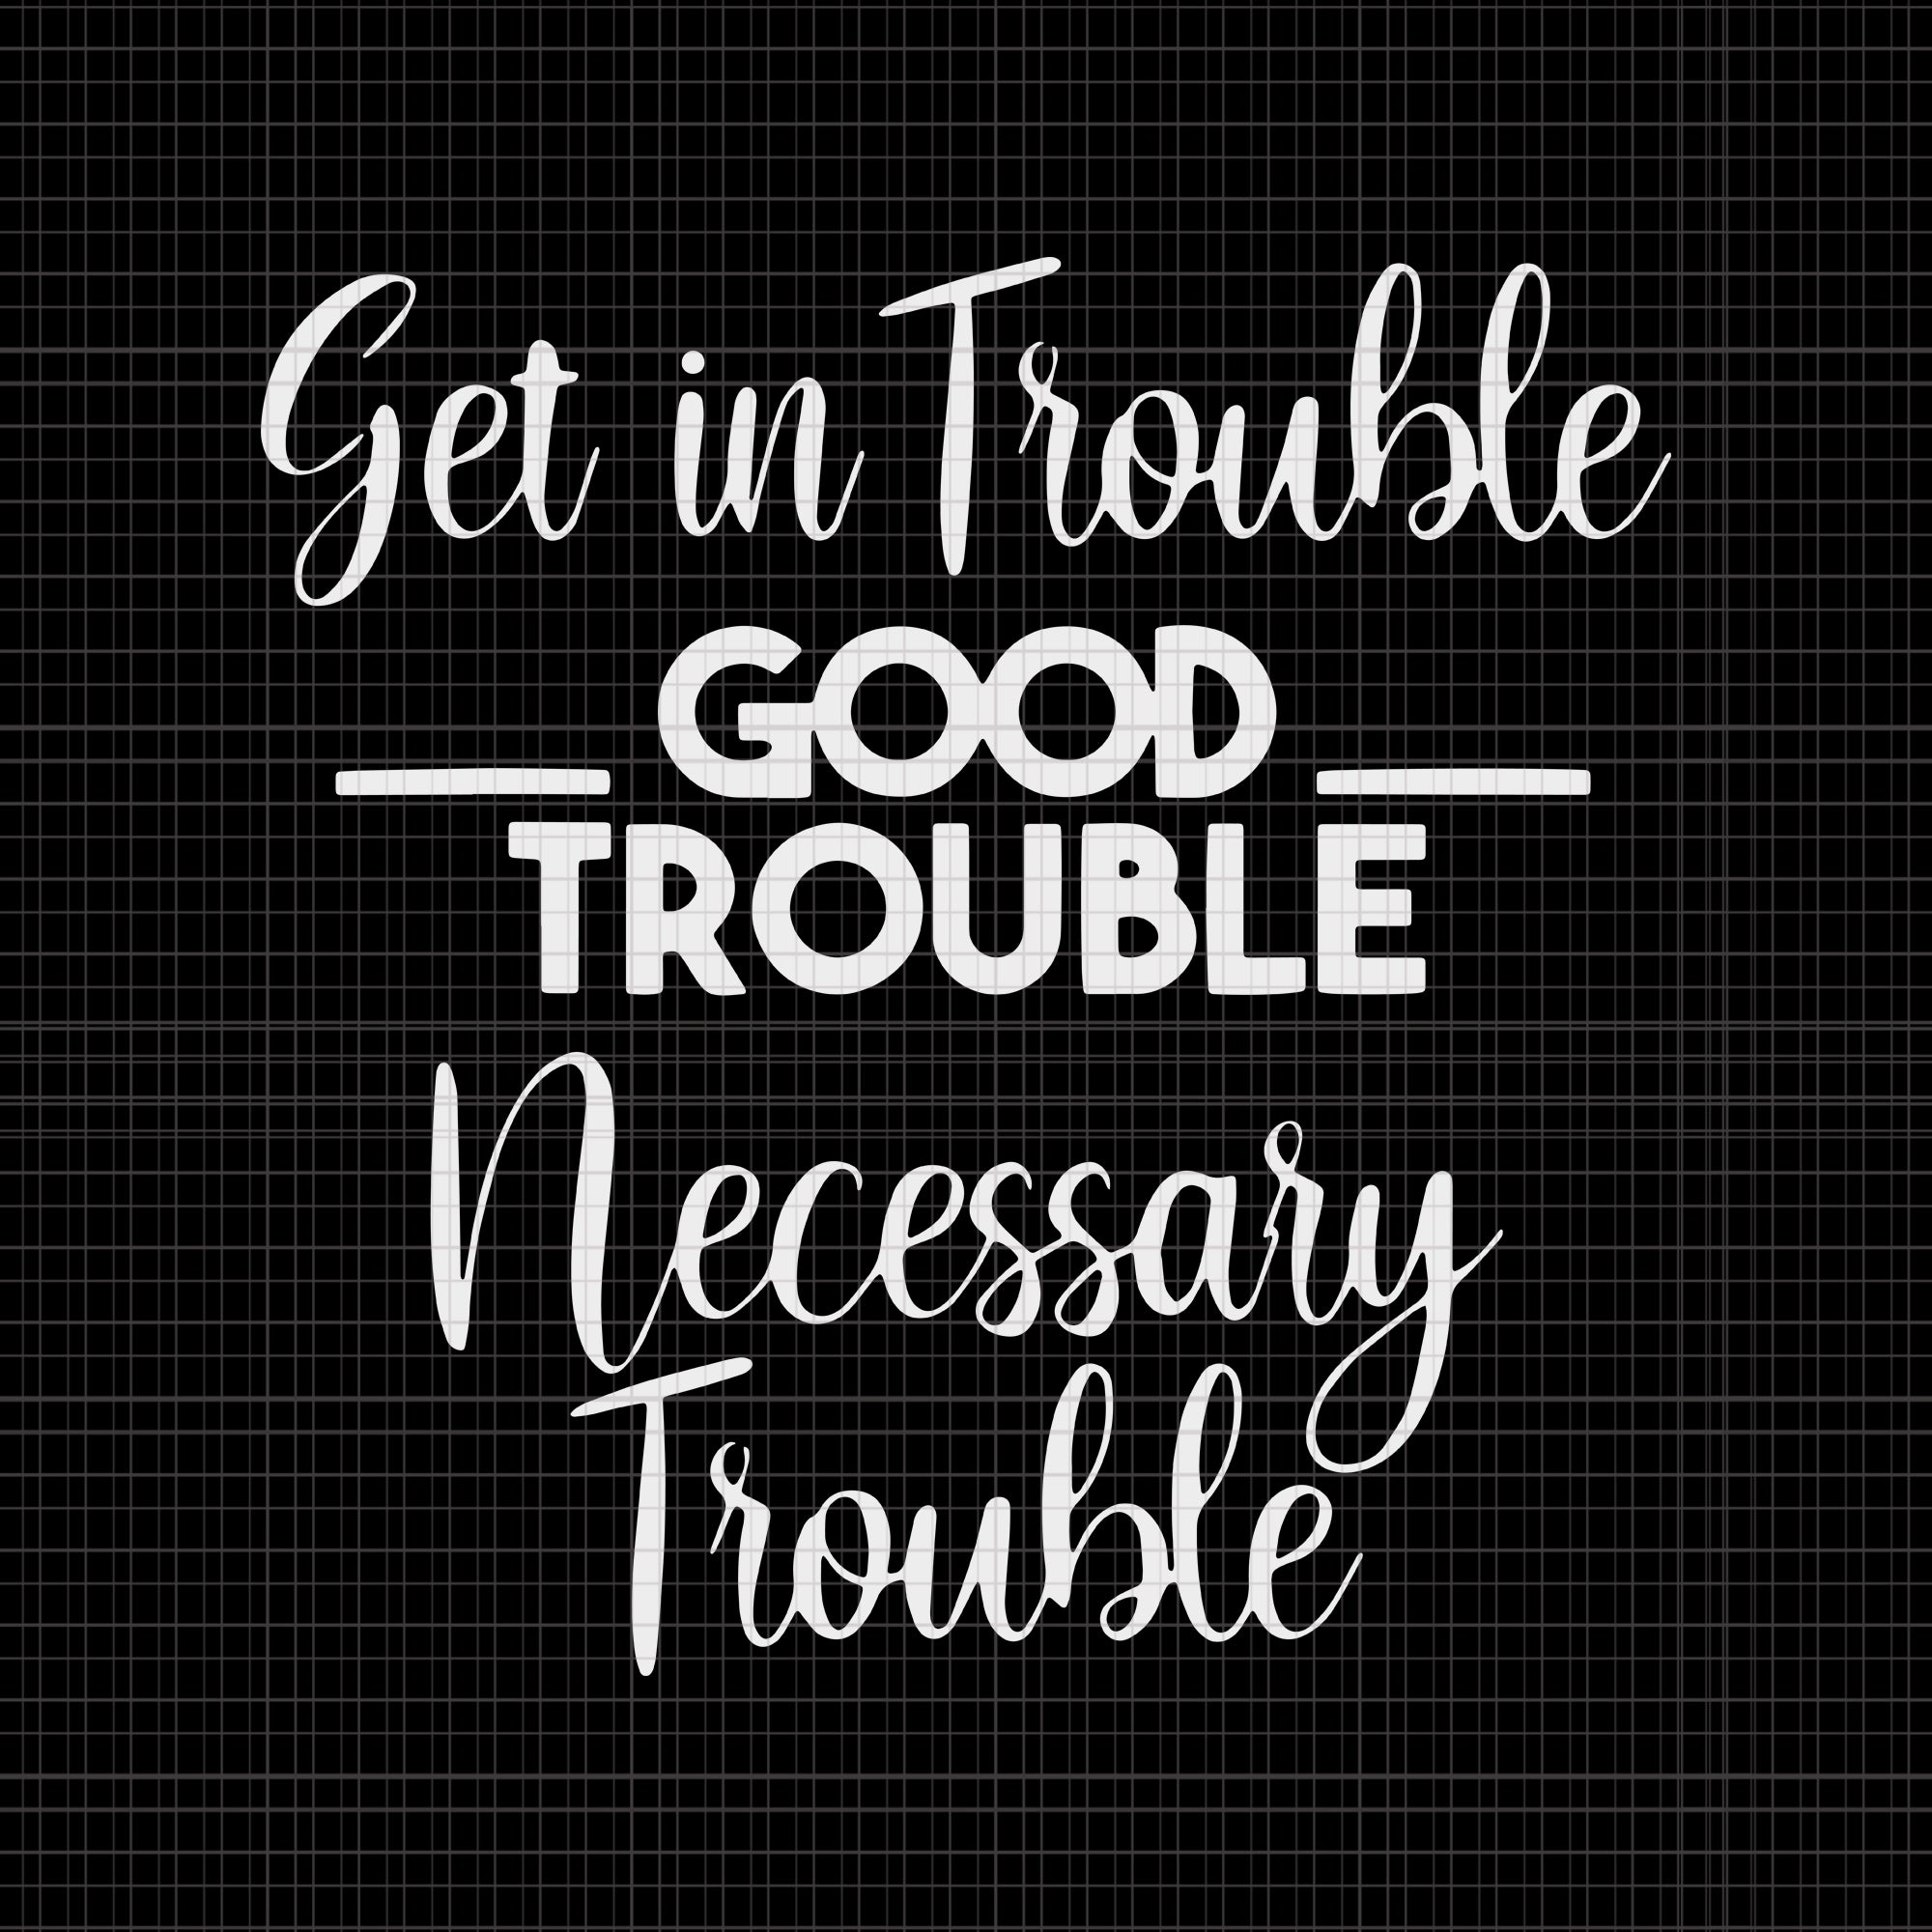 Get in Good Necessary Trouble Social Justice svg, Get in Good Necessary Trouble Social Justice, Get in Good Necessary Trouble Social, John Lewis svg, John Lewis design